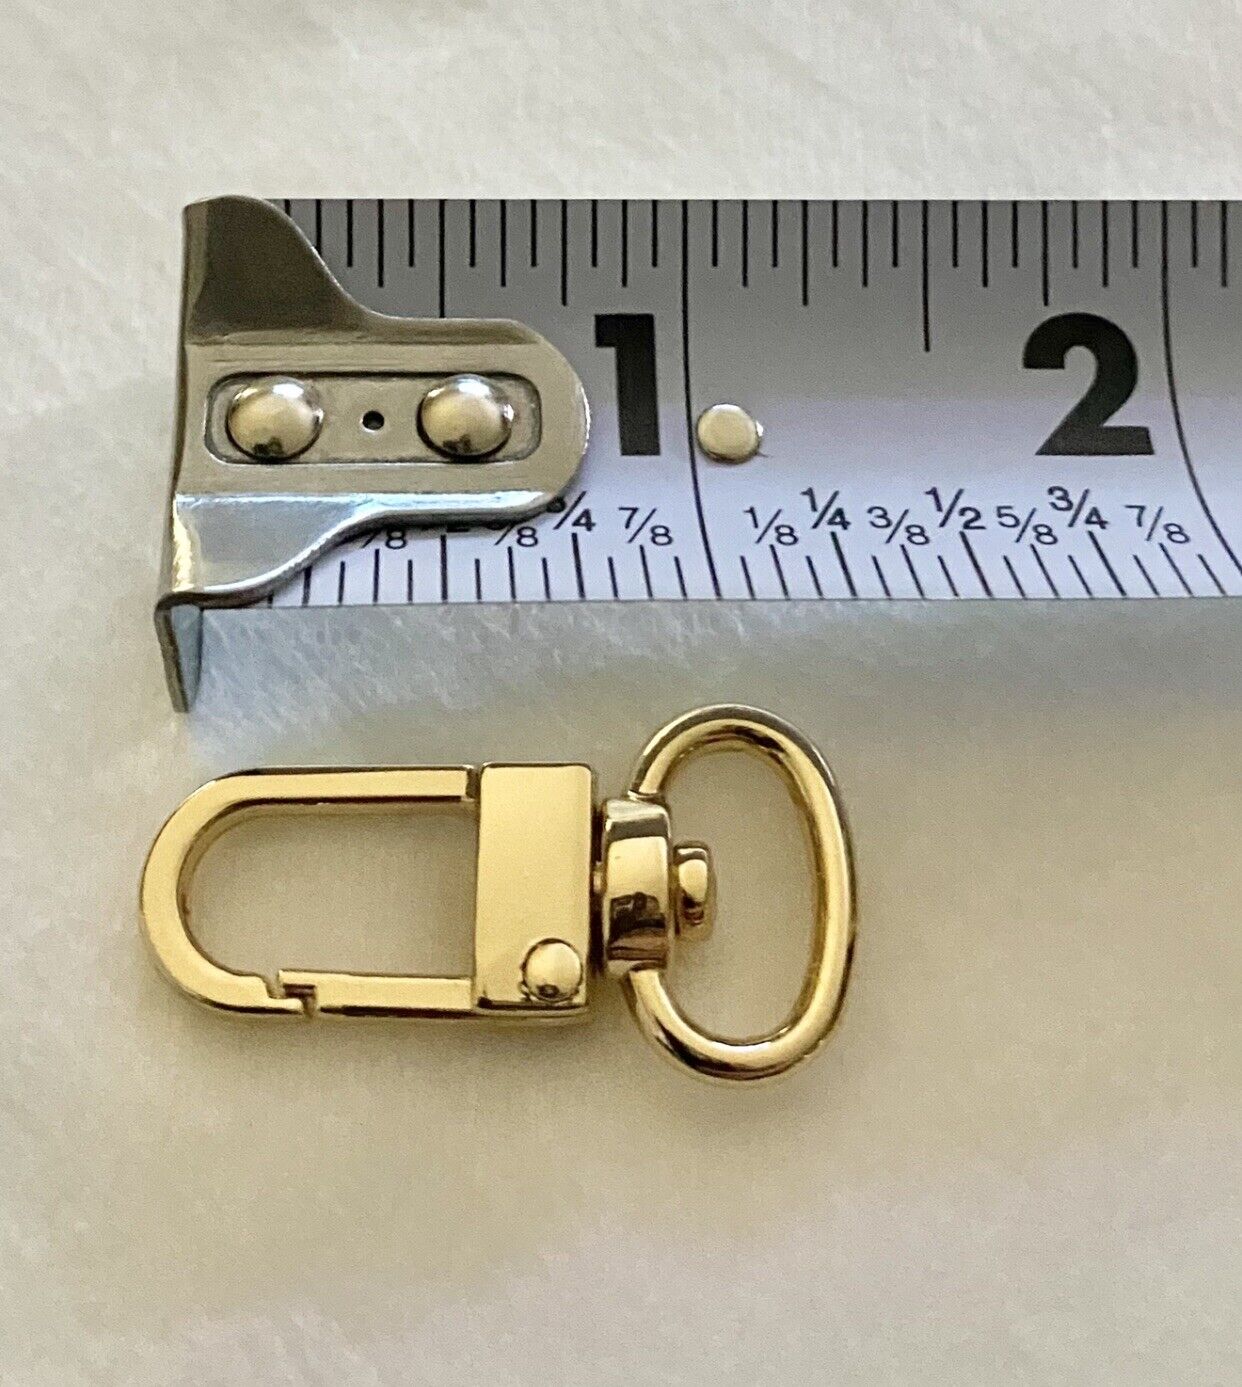 2X Goldtone Swivel Clasp fits Louis Vuitton Name Tag - Key Chain Fob Hook